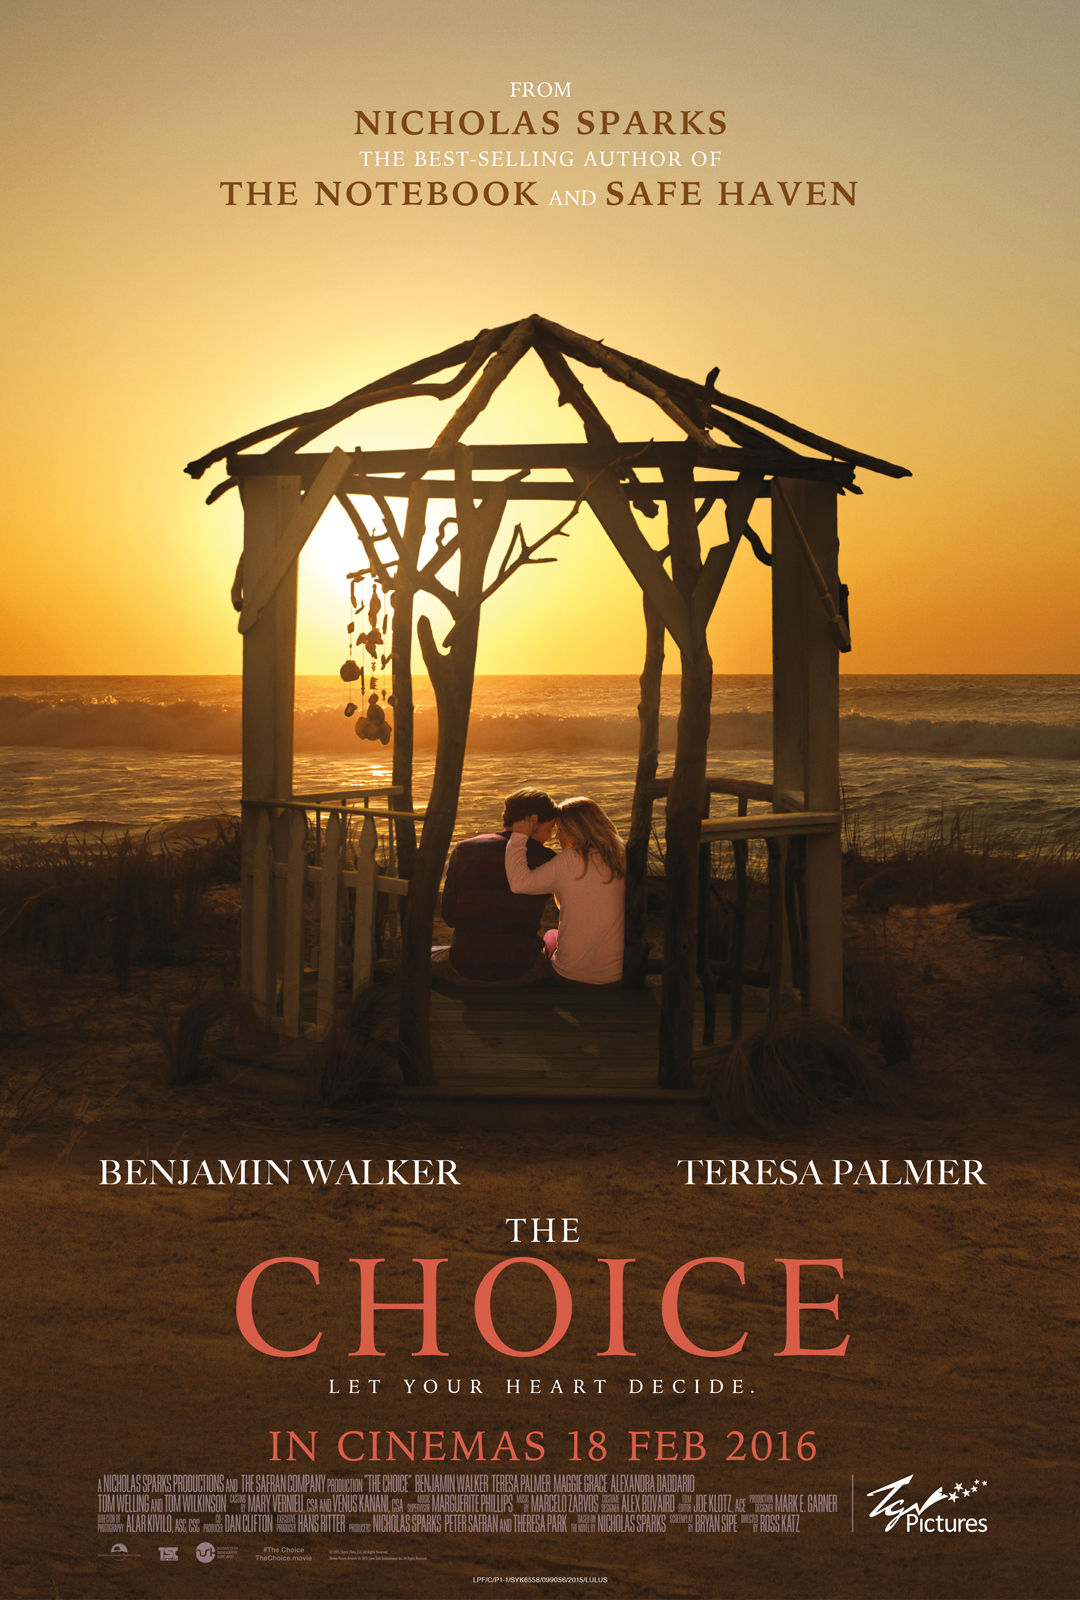 TheChoice_Poster27x40_03